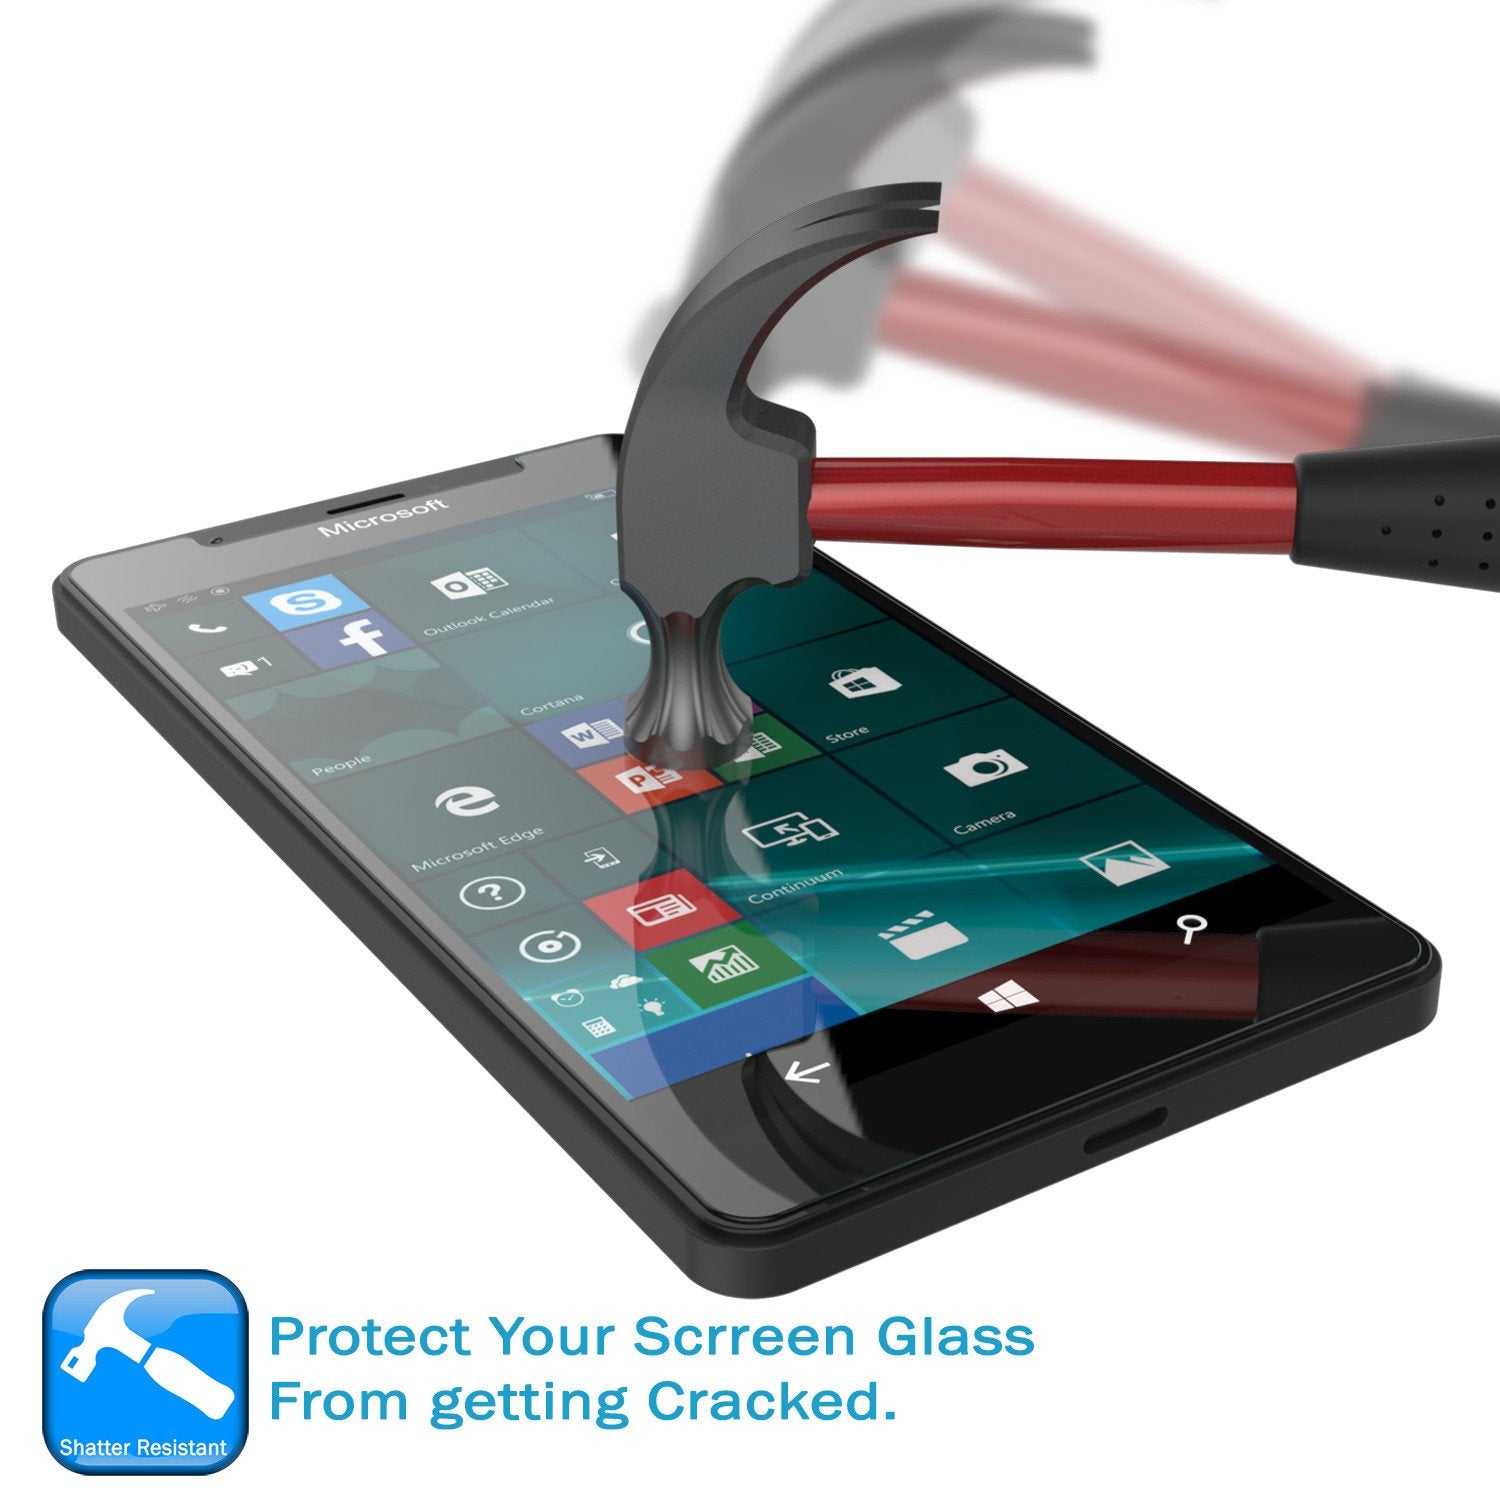 Microsoft Lumia 950 Screen Protector, Punkcase SHIELD Tempered Glass Protector 0.33mm Thick 9H